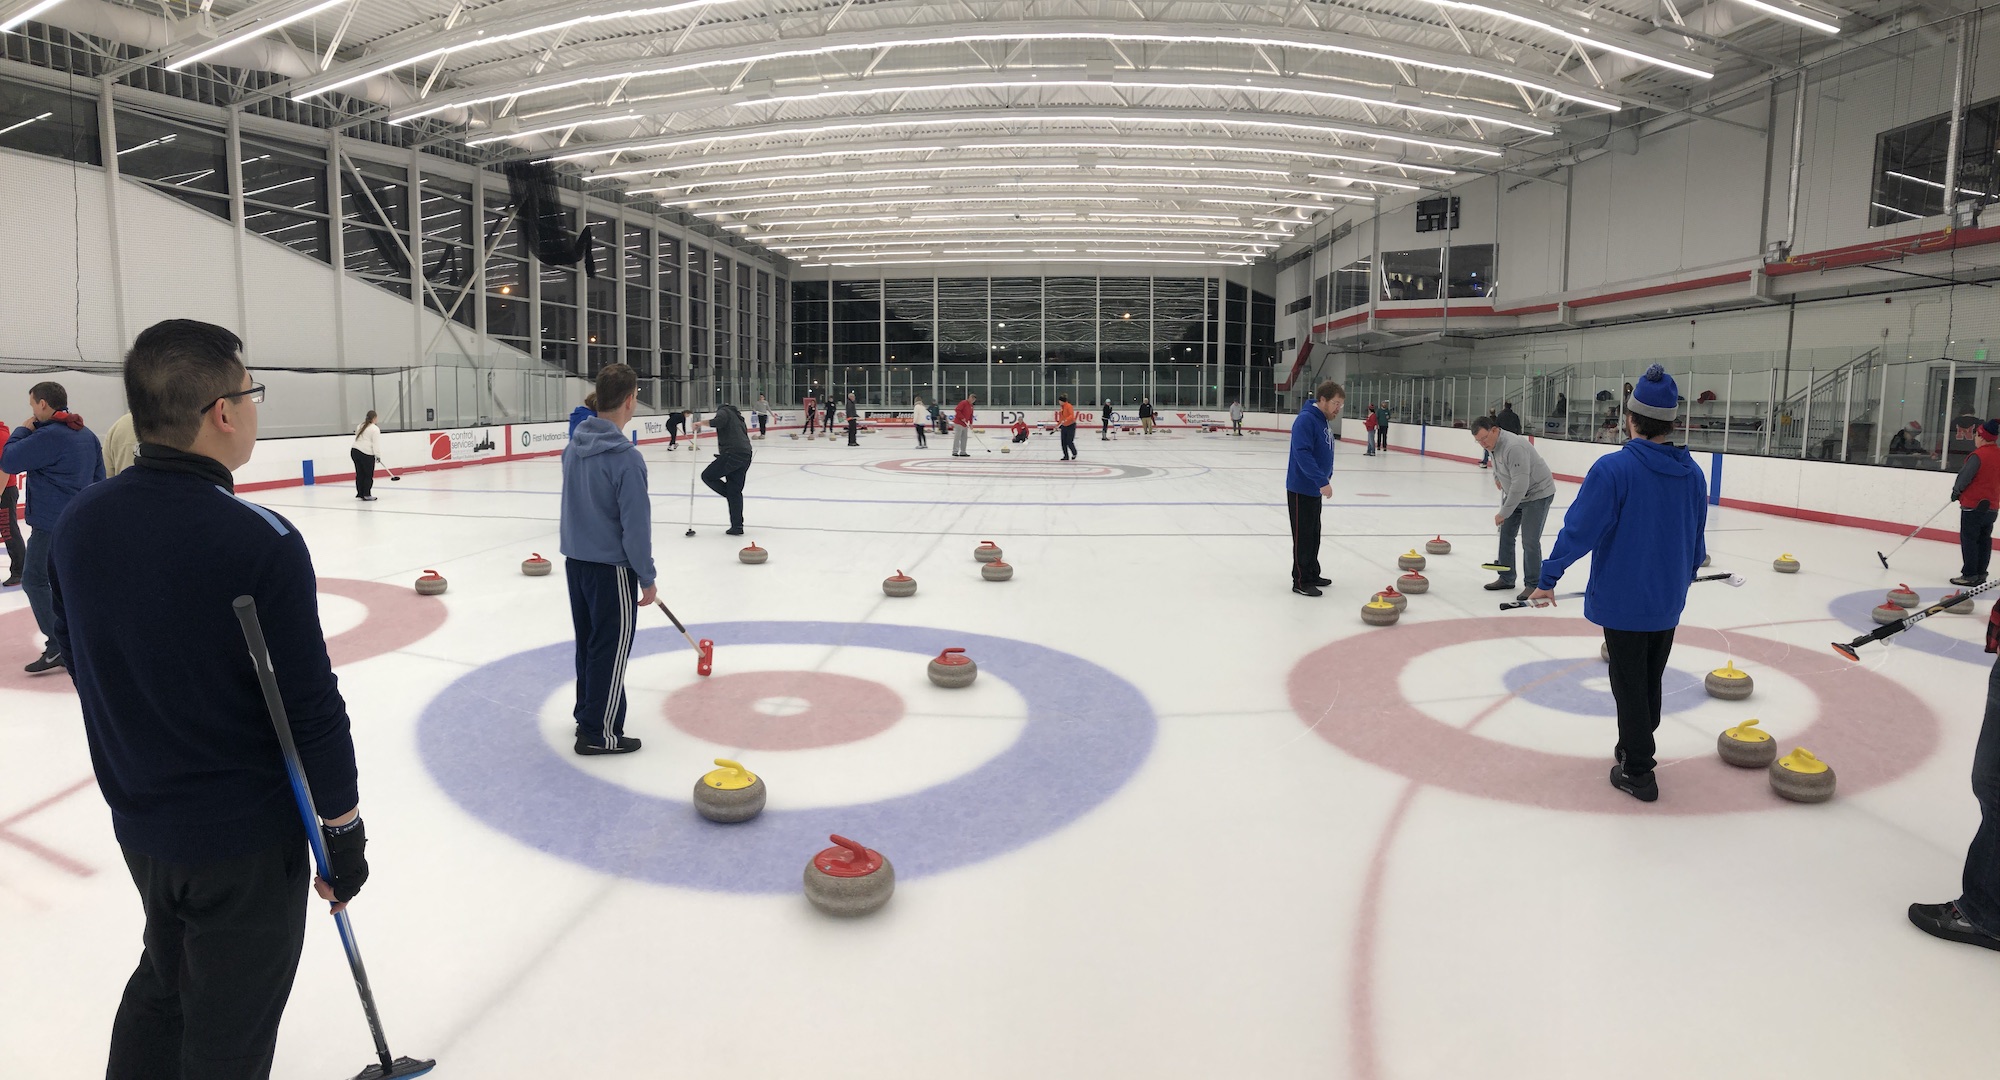 Practice Ice / Drop-in Curling - Sunday, Mar 20, 2022 at 6:45pm